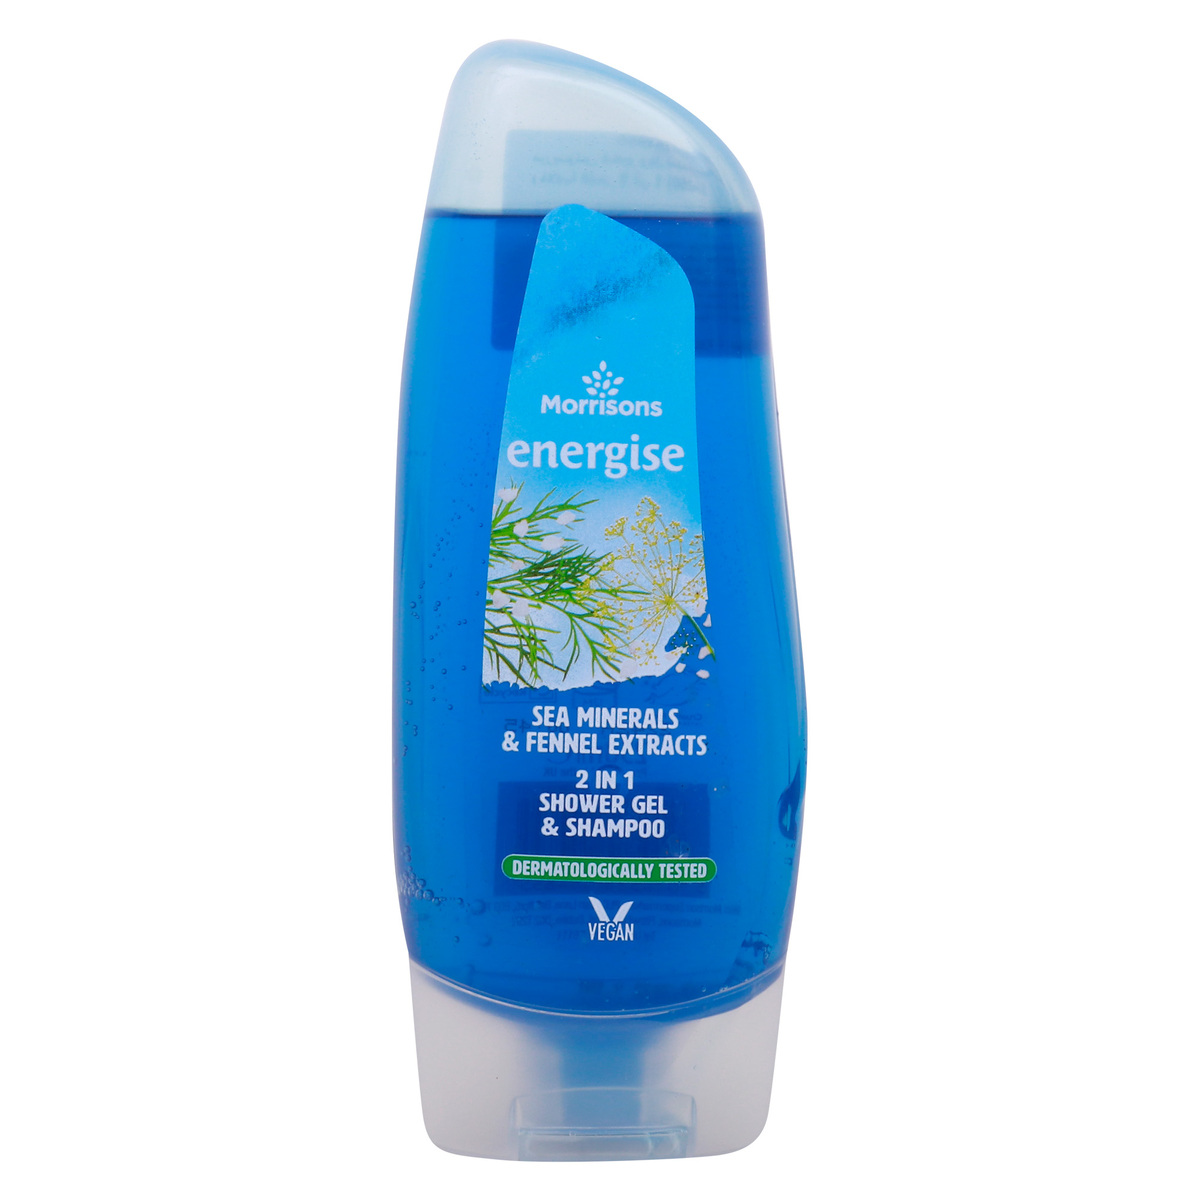 Morrisons 2in1 Shower Gel & Shampoo Sea Minerals & Fennel Extracts, 250 ml